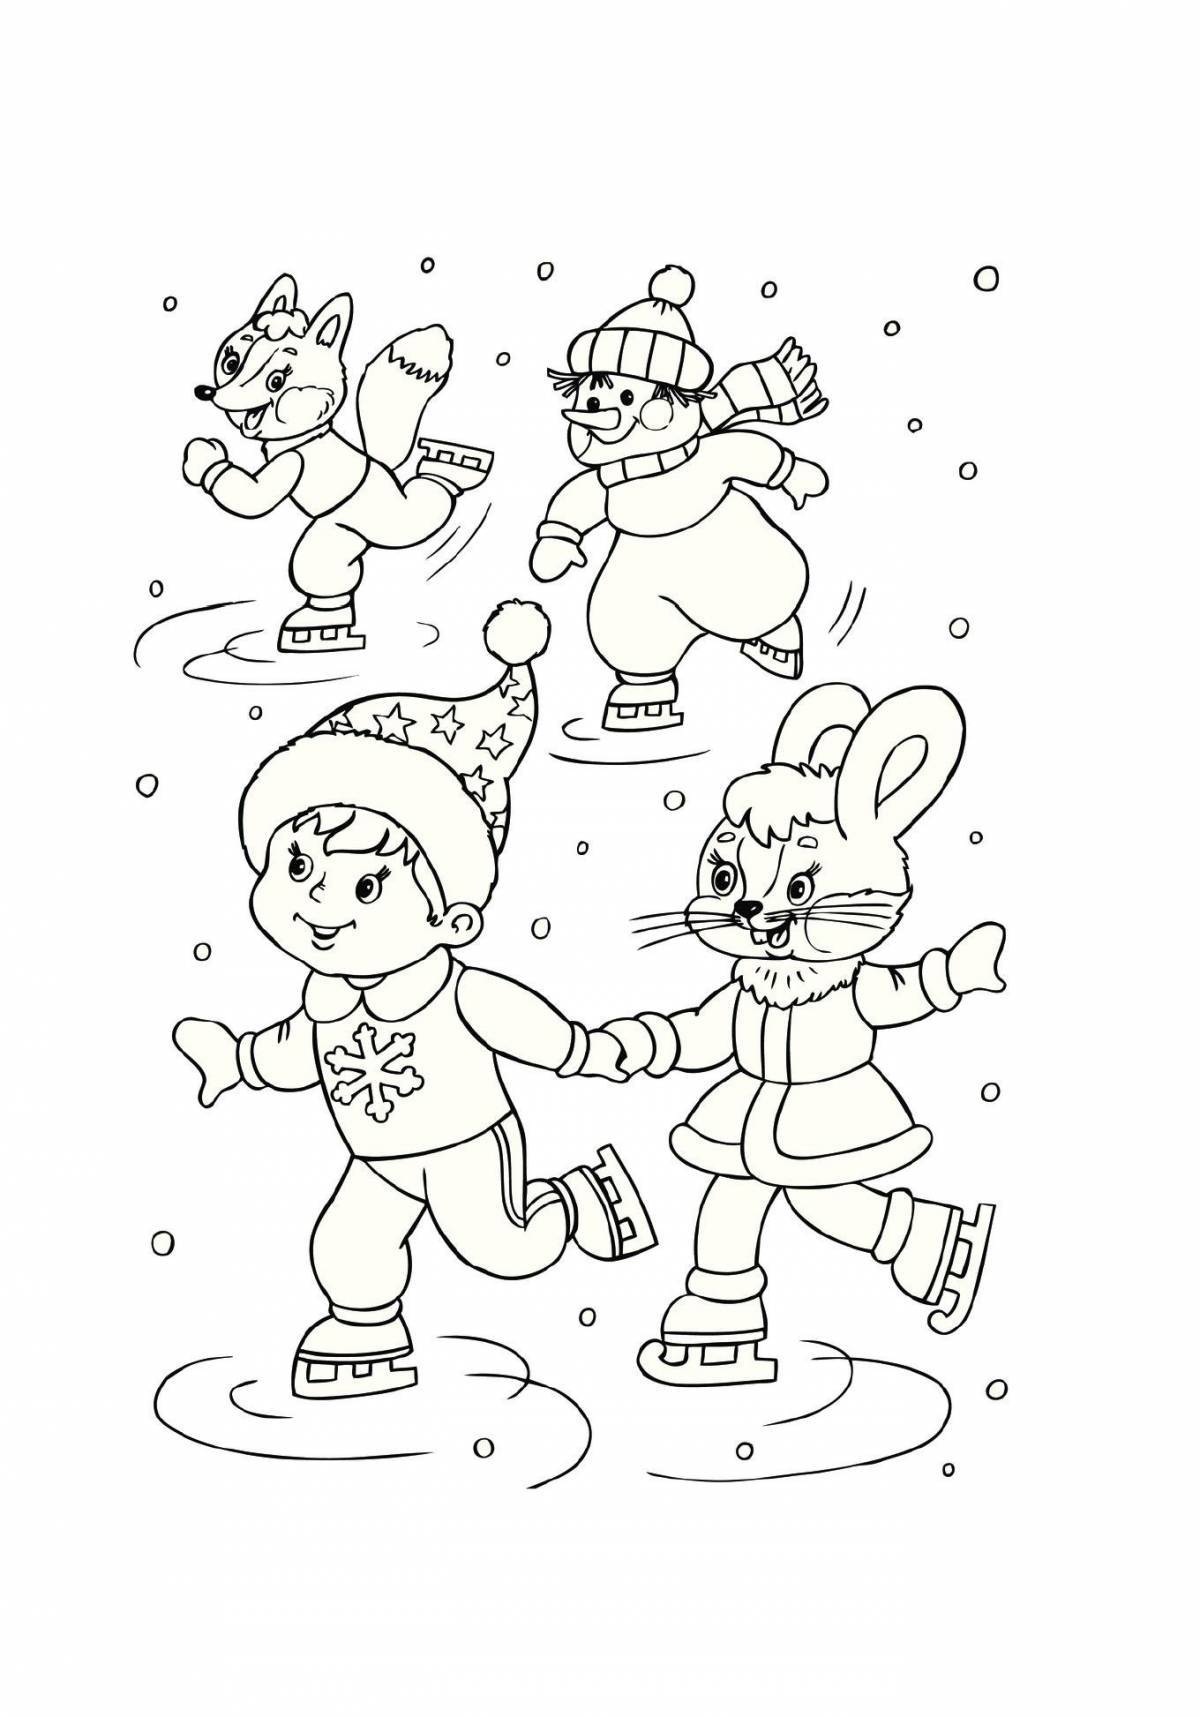 Fantastic winter fun coloring book for 3-4 year olds